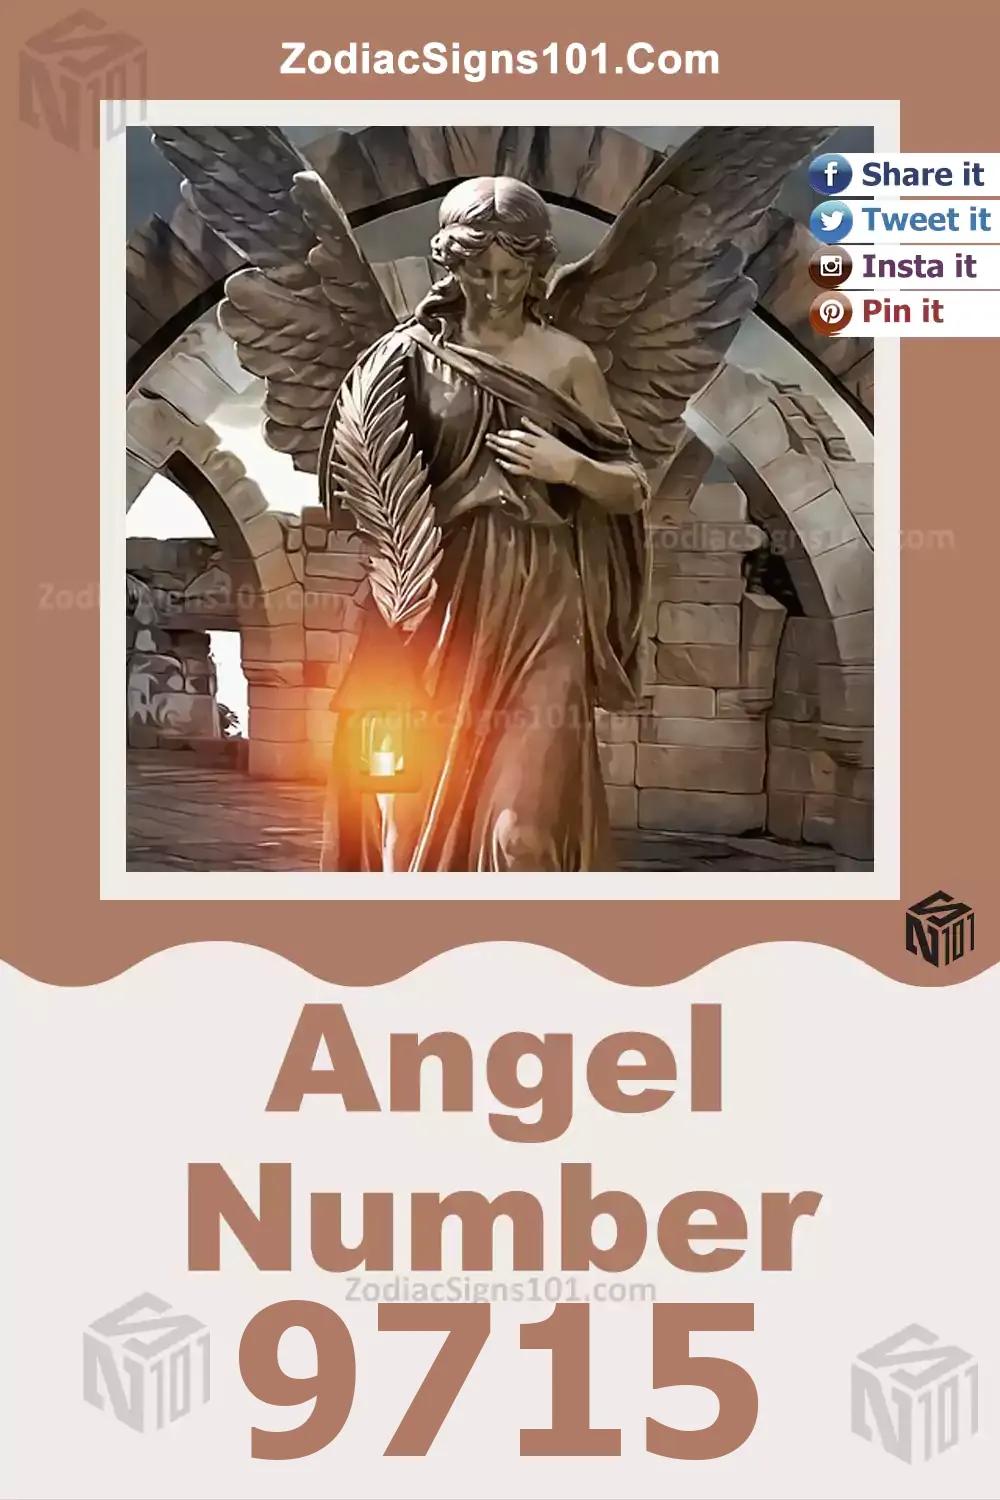 9715 Angel Number Meaning